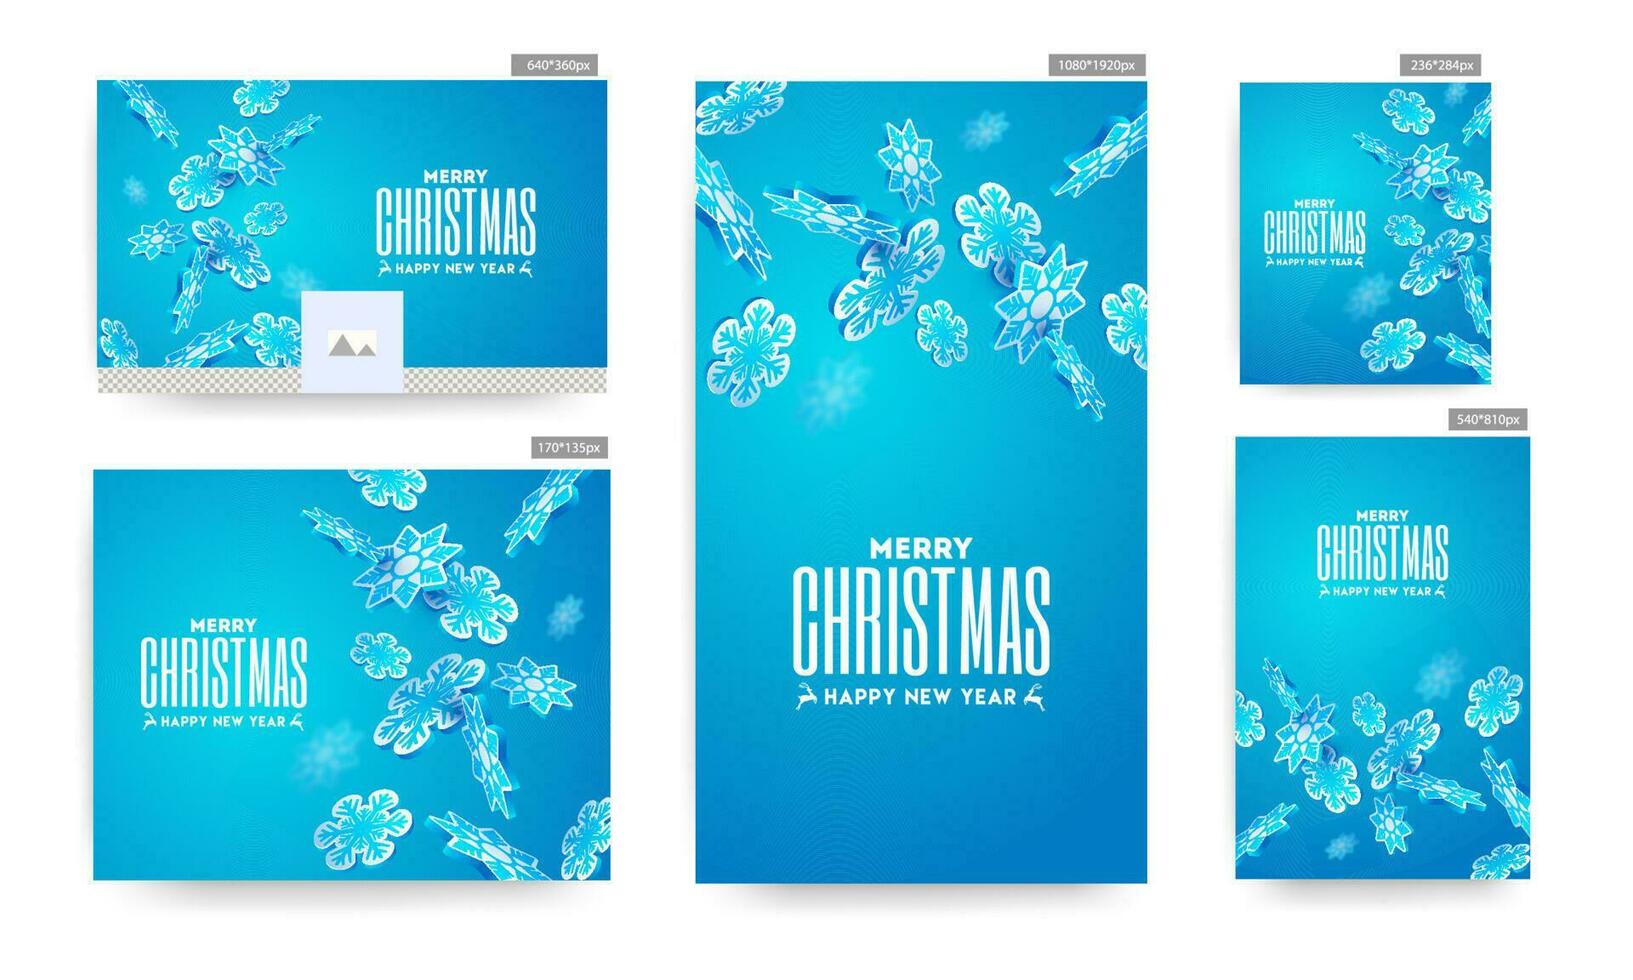 Merry Christmas and Happy New Year poster and template set with 3d paper snowflakes decorated on blue background. vector